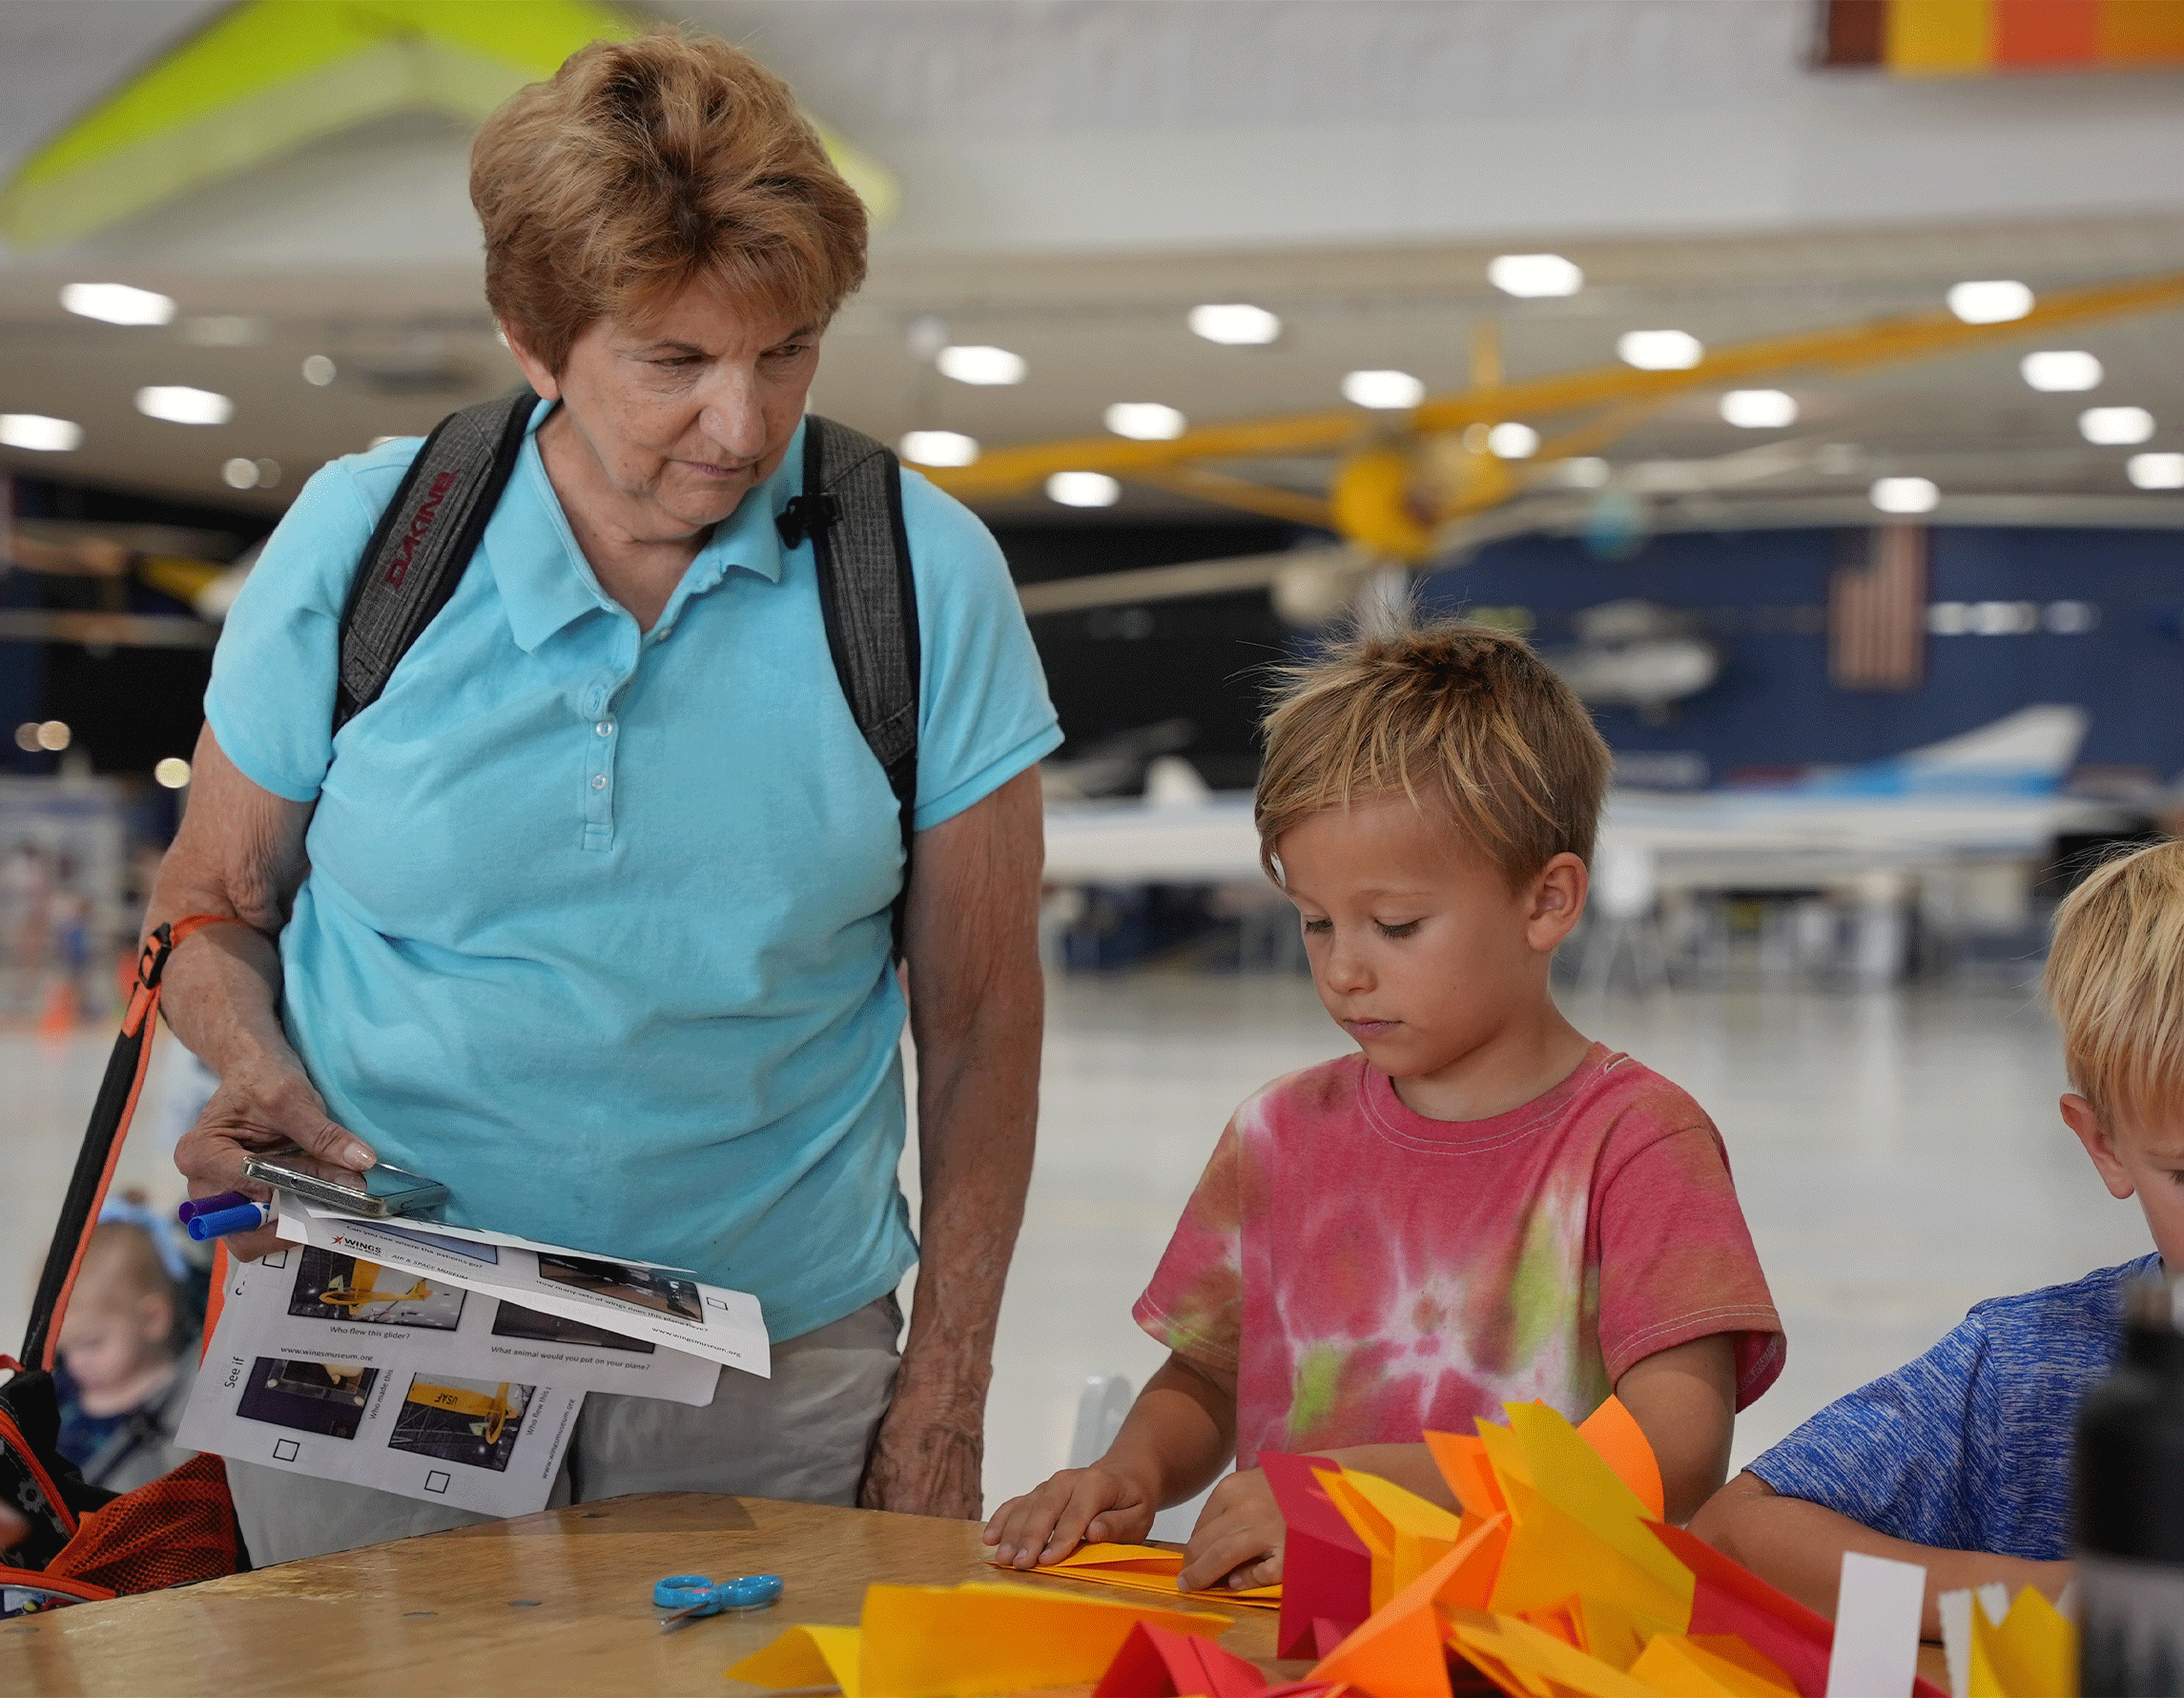 Grandmother & grandson making a paper airplane